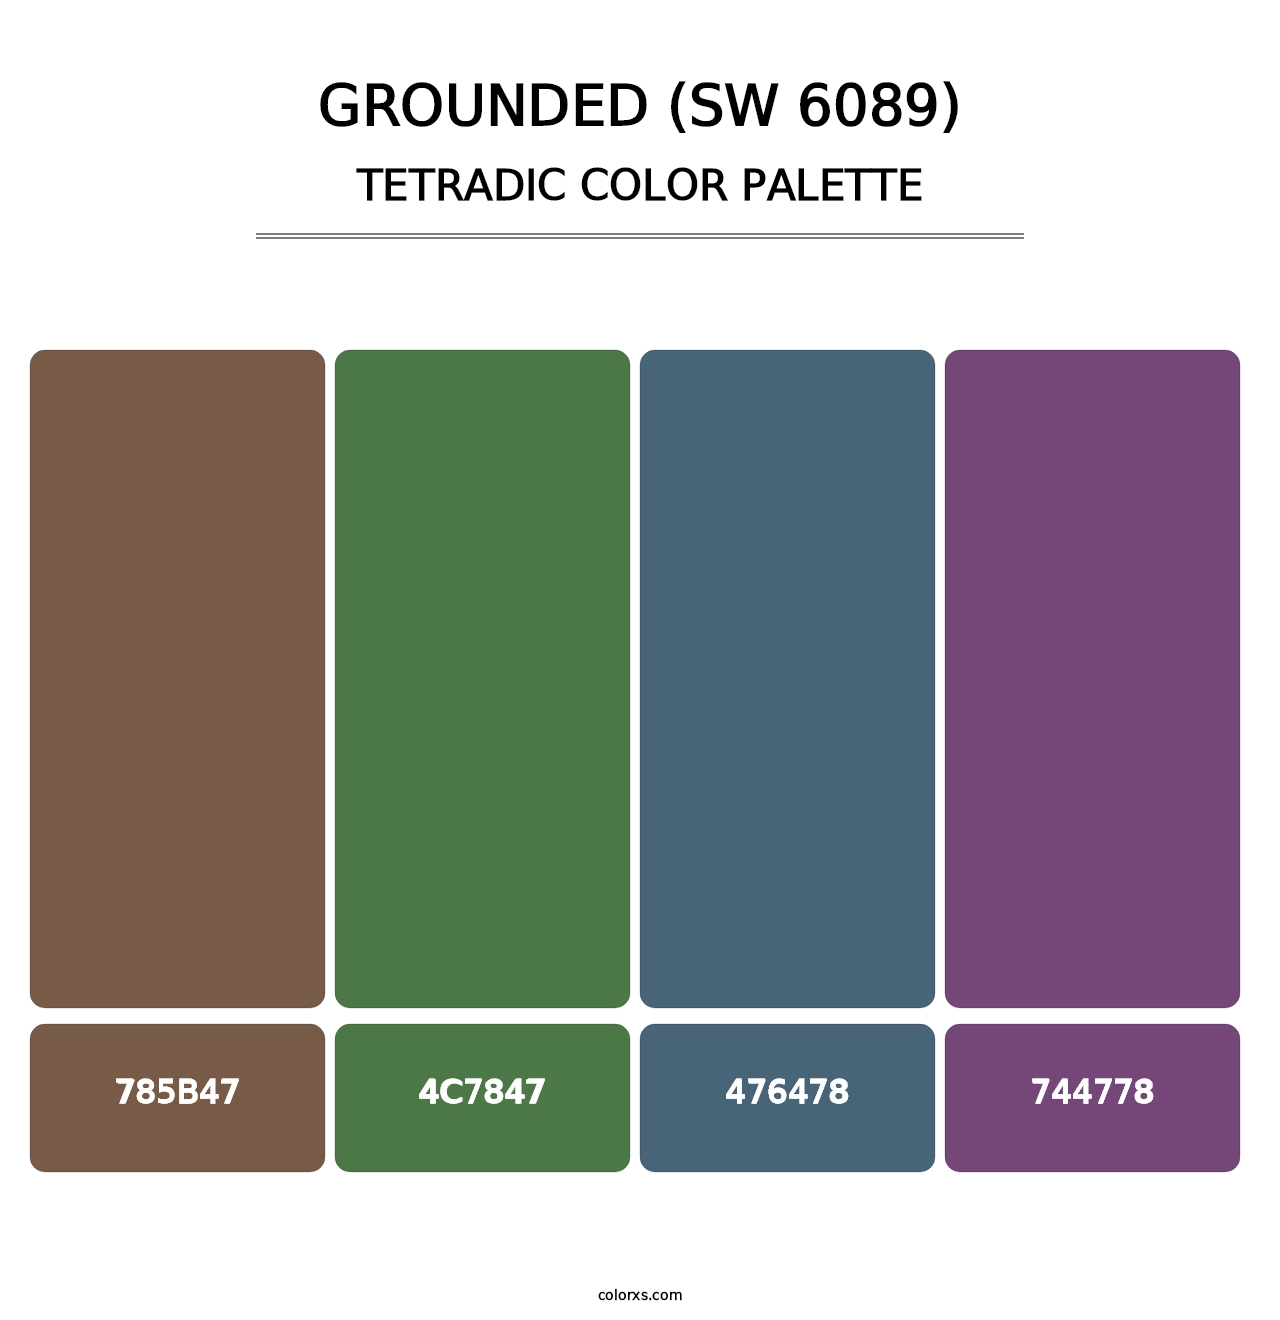 Grounded (SW 6089) - Tetradic Color Palette